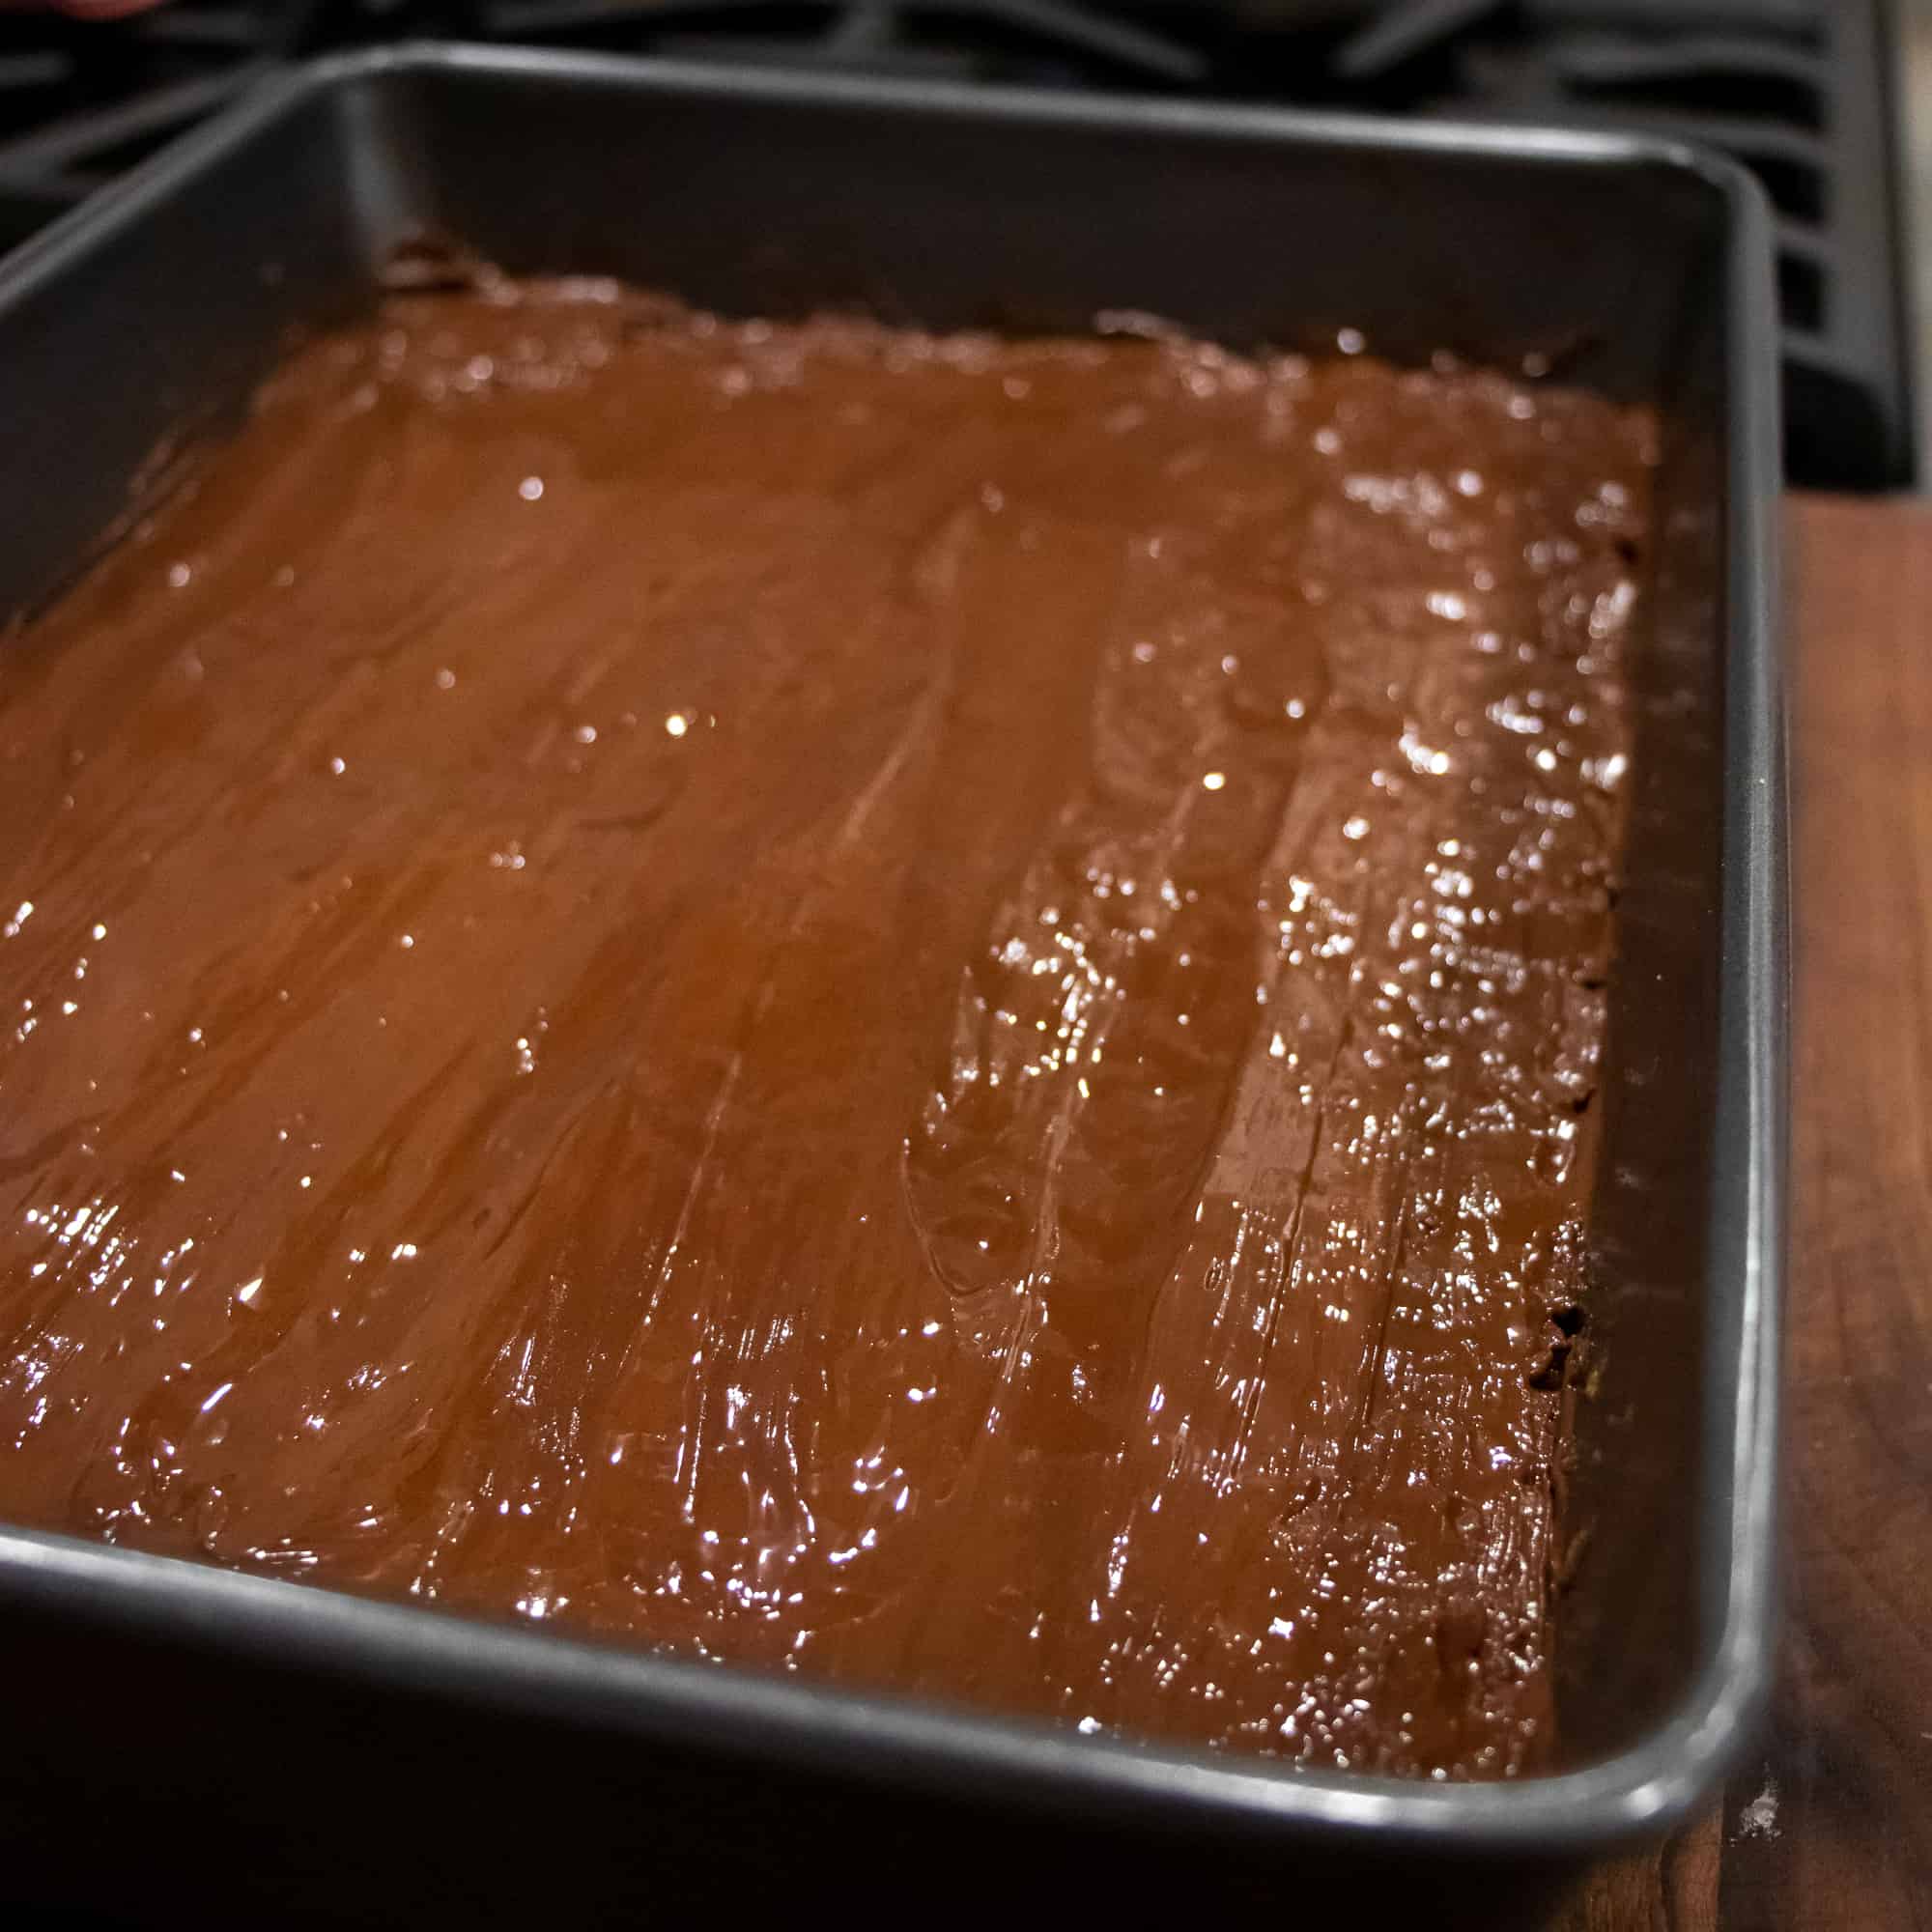 Spread the melted chocolate evenly on the cooled caramel layer.